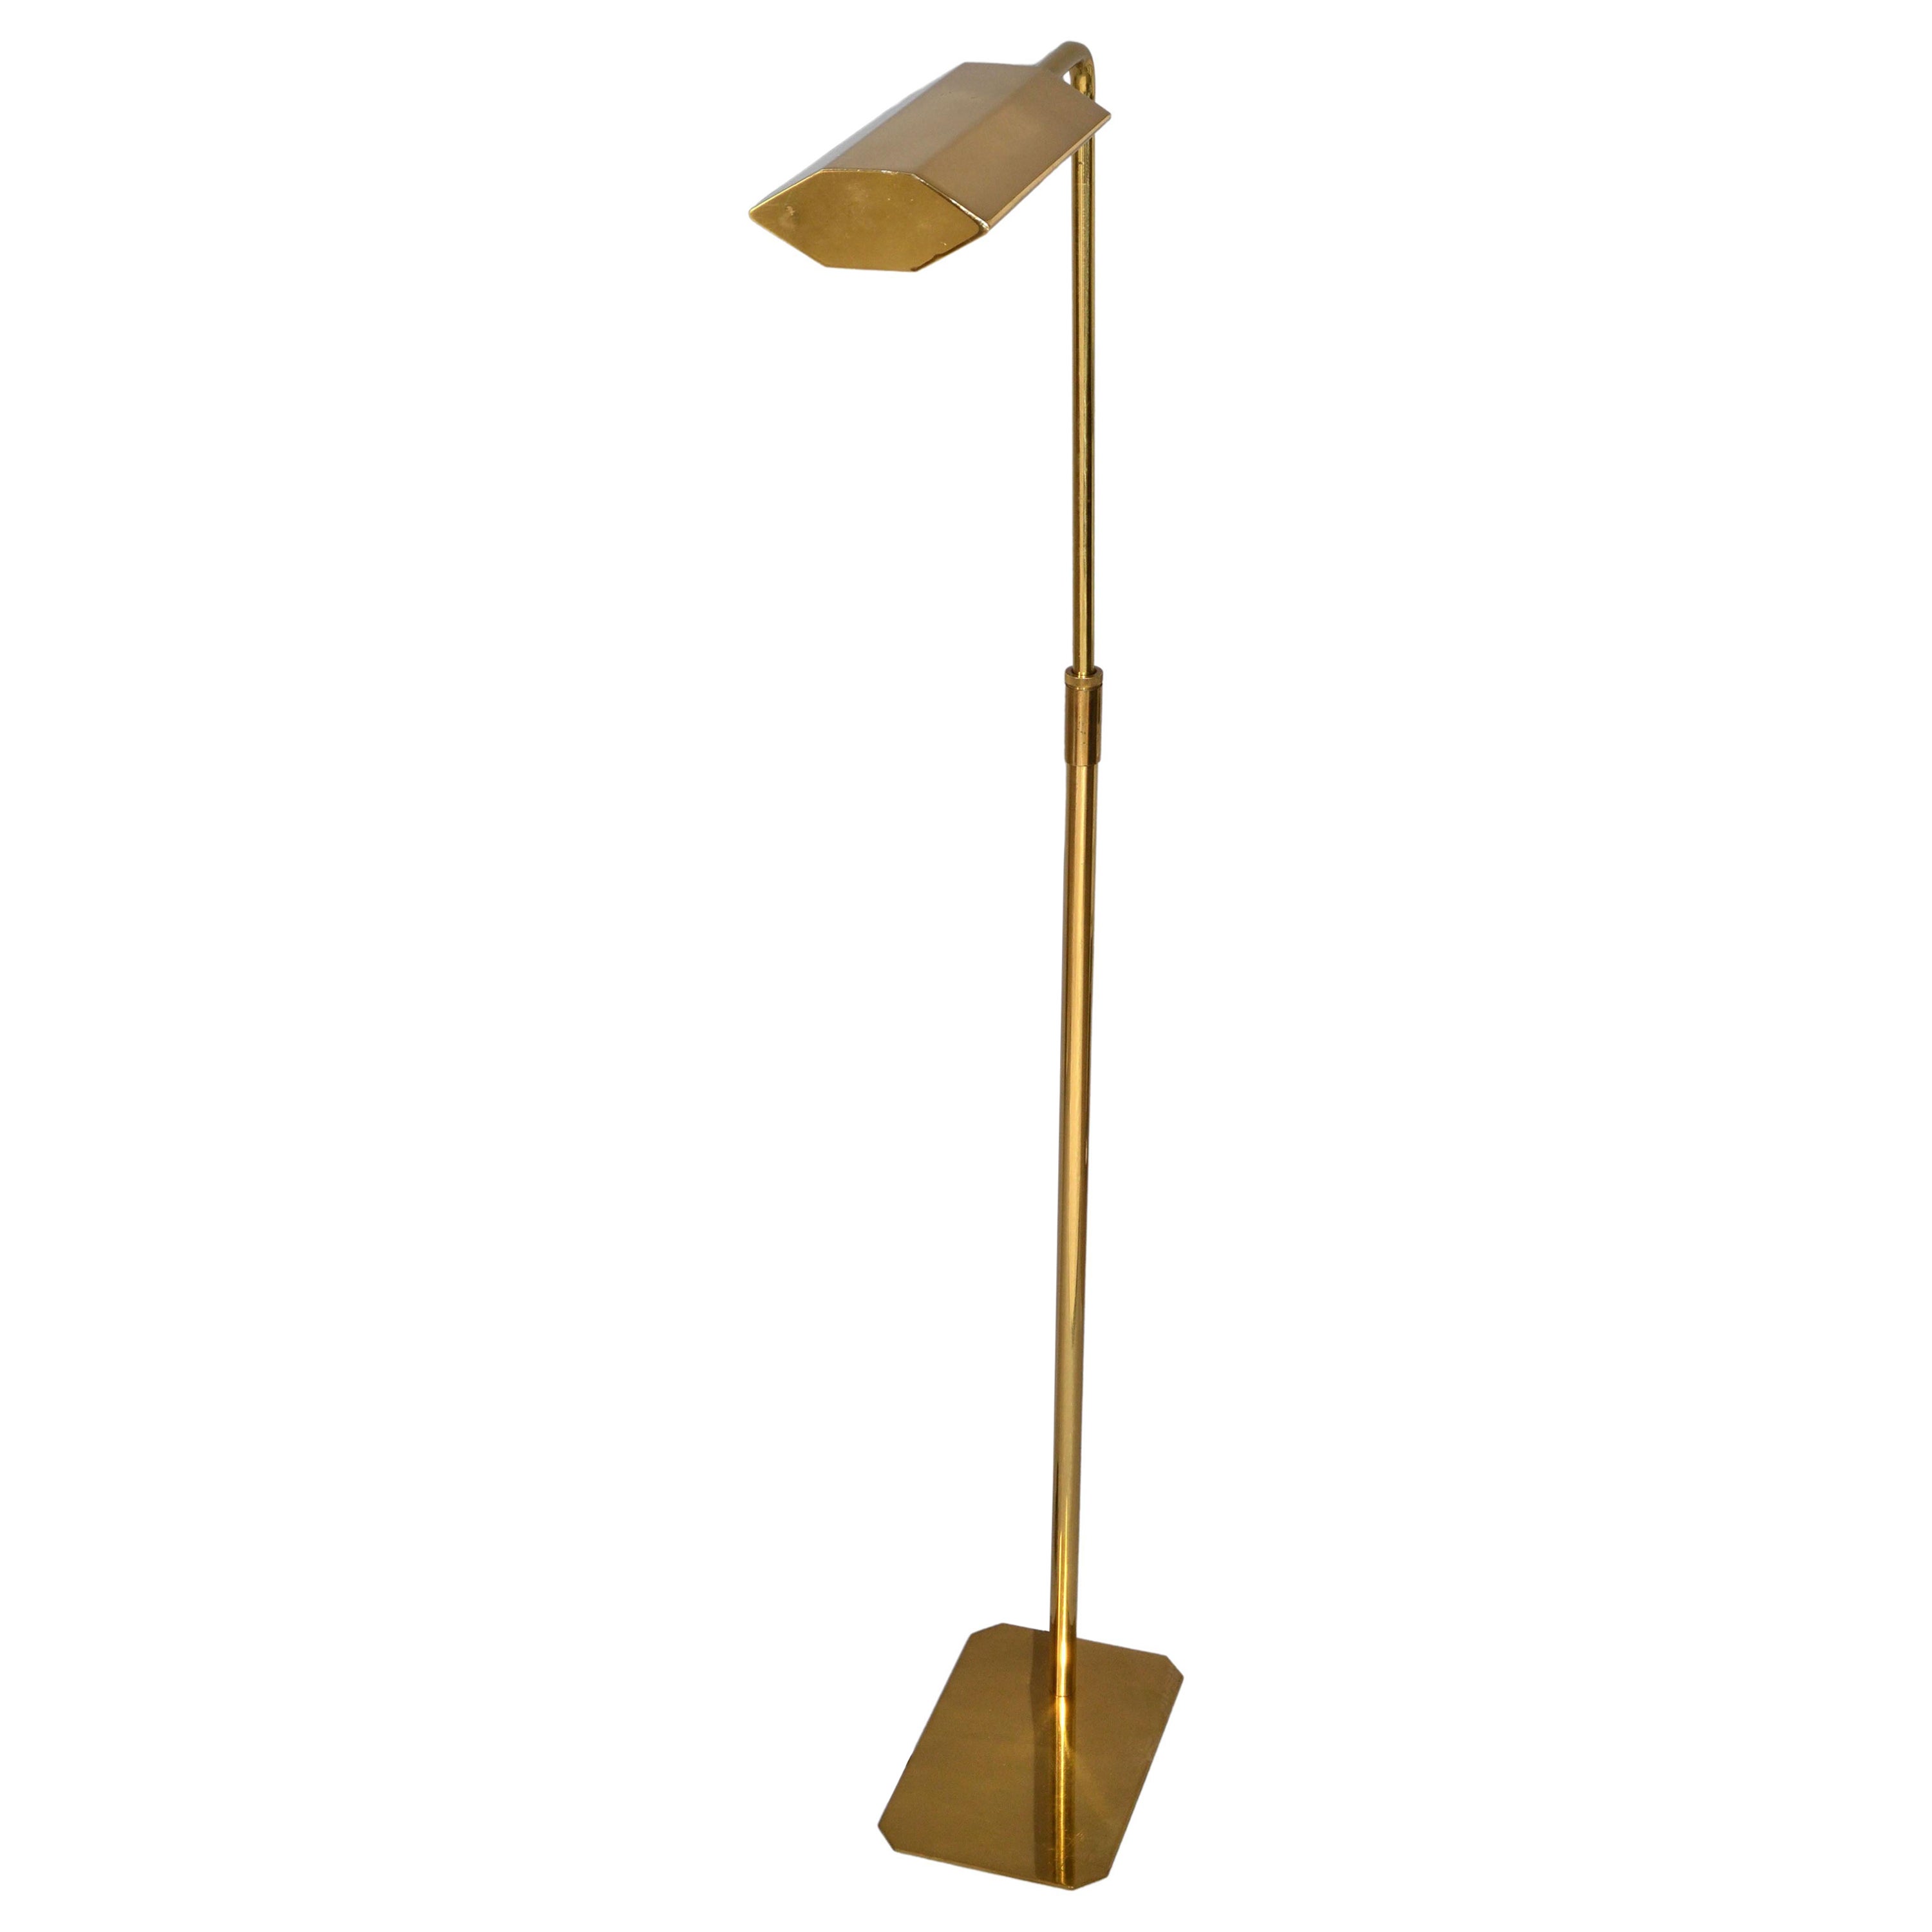 Original Koch & Lowy Articulated Polished Brass Floor Lamp Mid-Century Modern For Sale